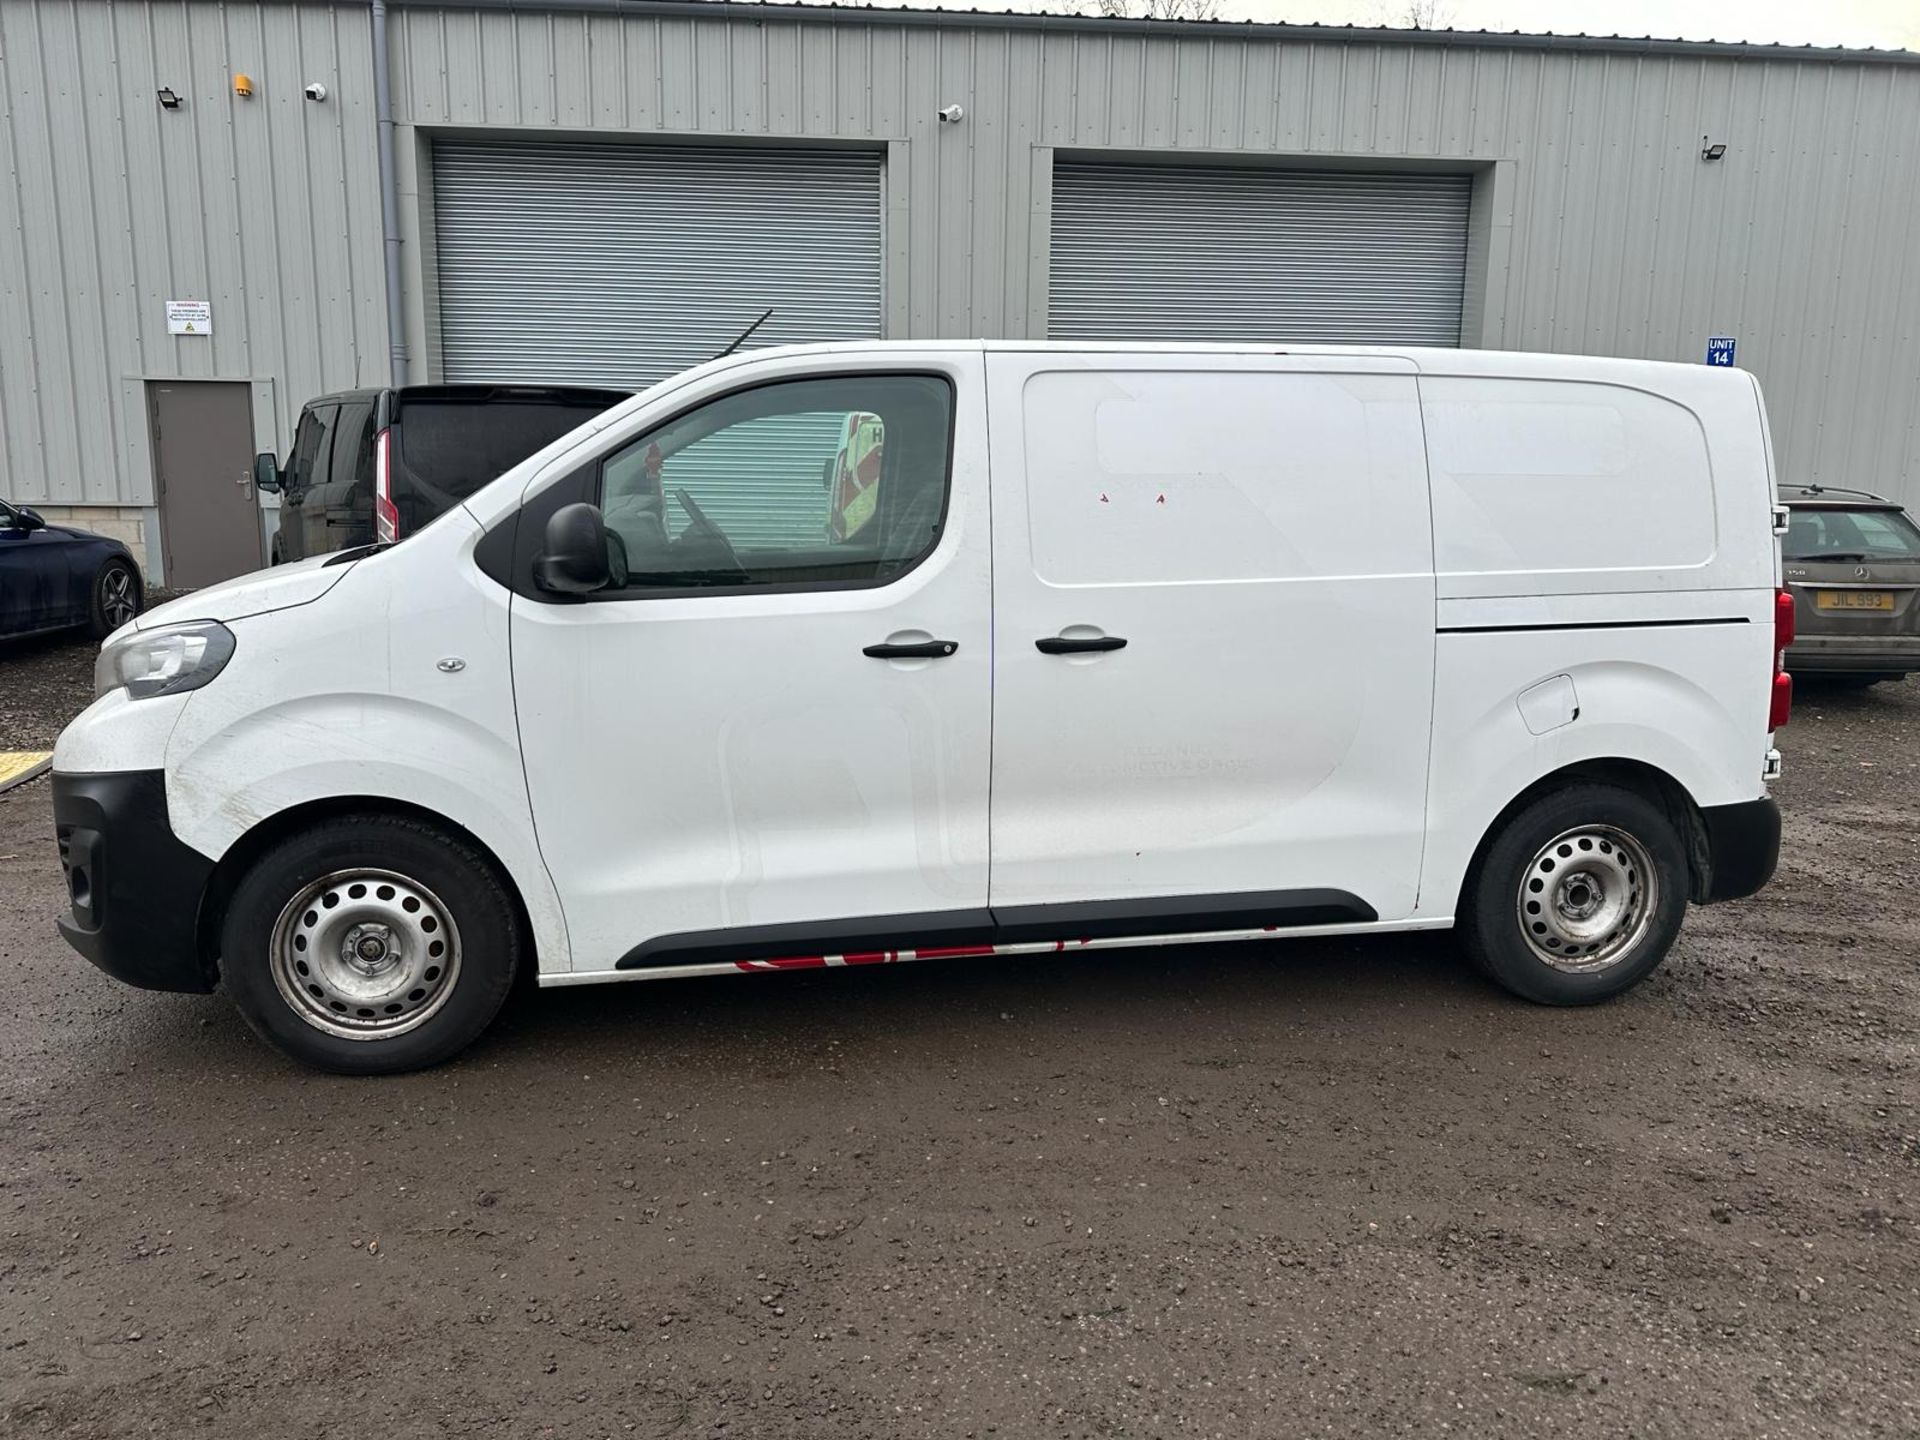 2019 69 PEUGEOT EXPERT PANEL VAN - 140K MILES - AIR CON - PLY LINED - Image 3 of 10